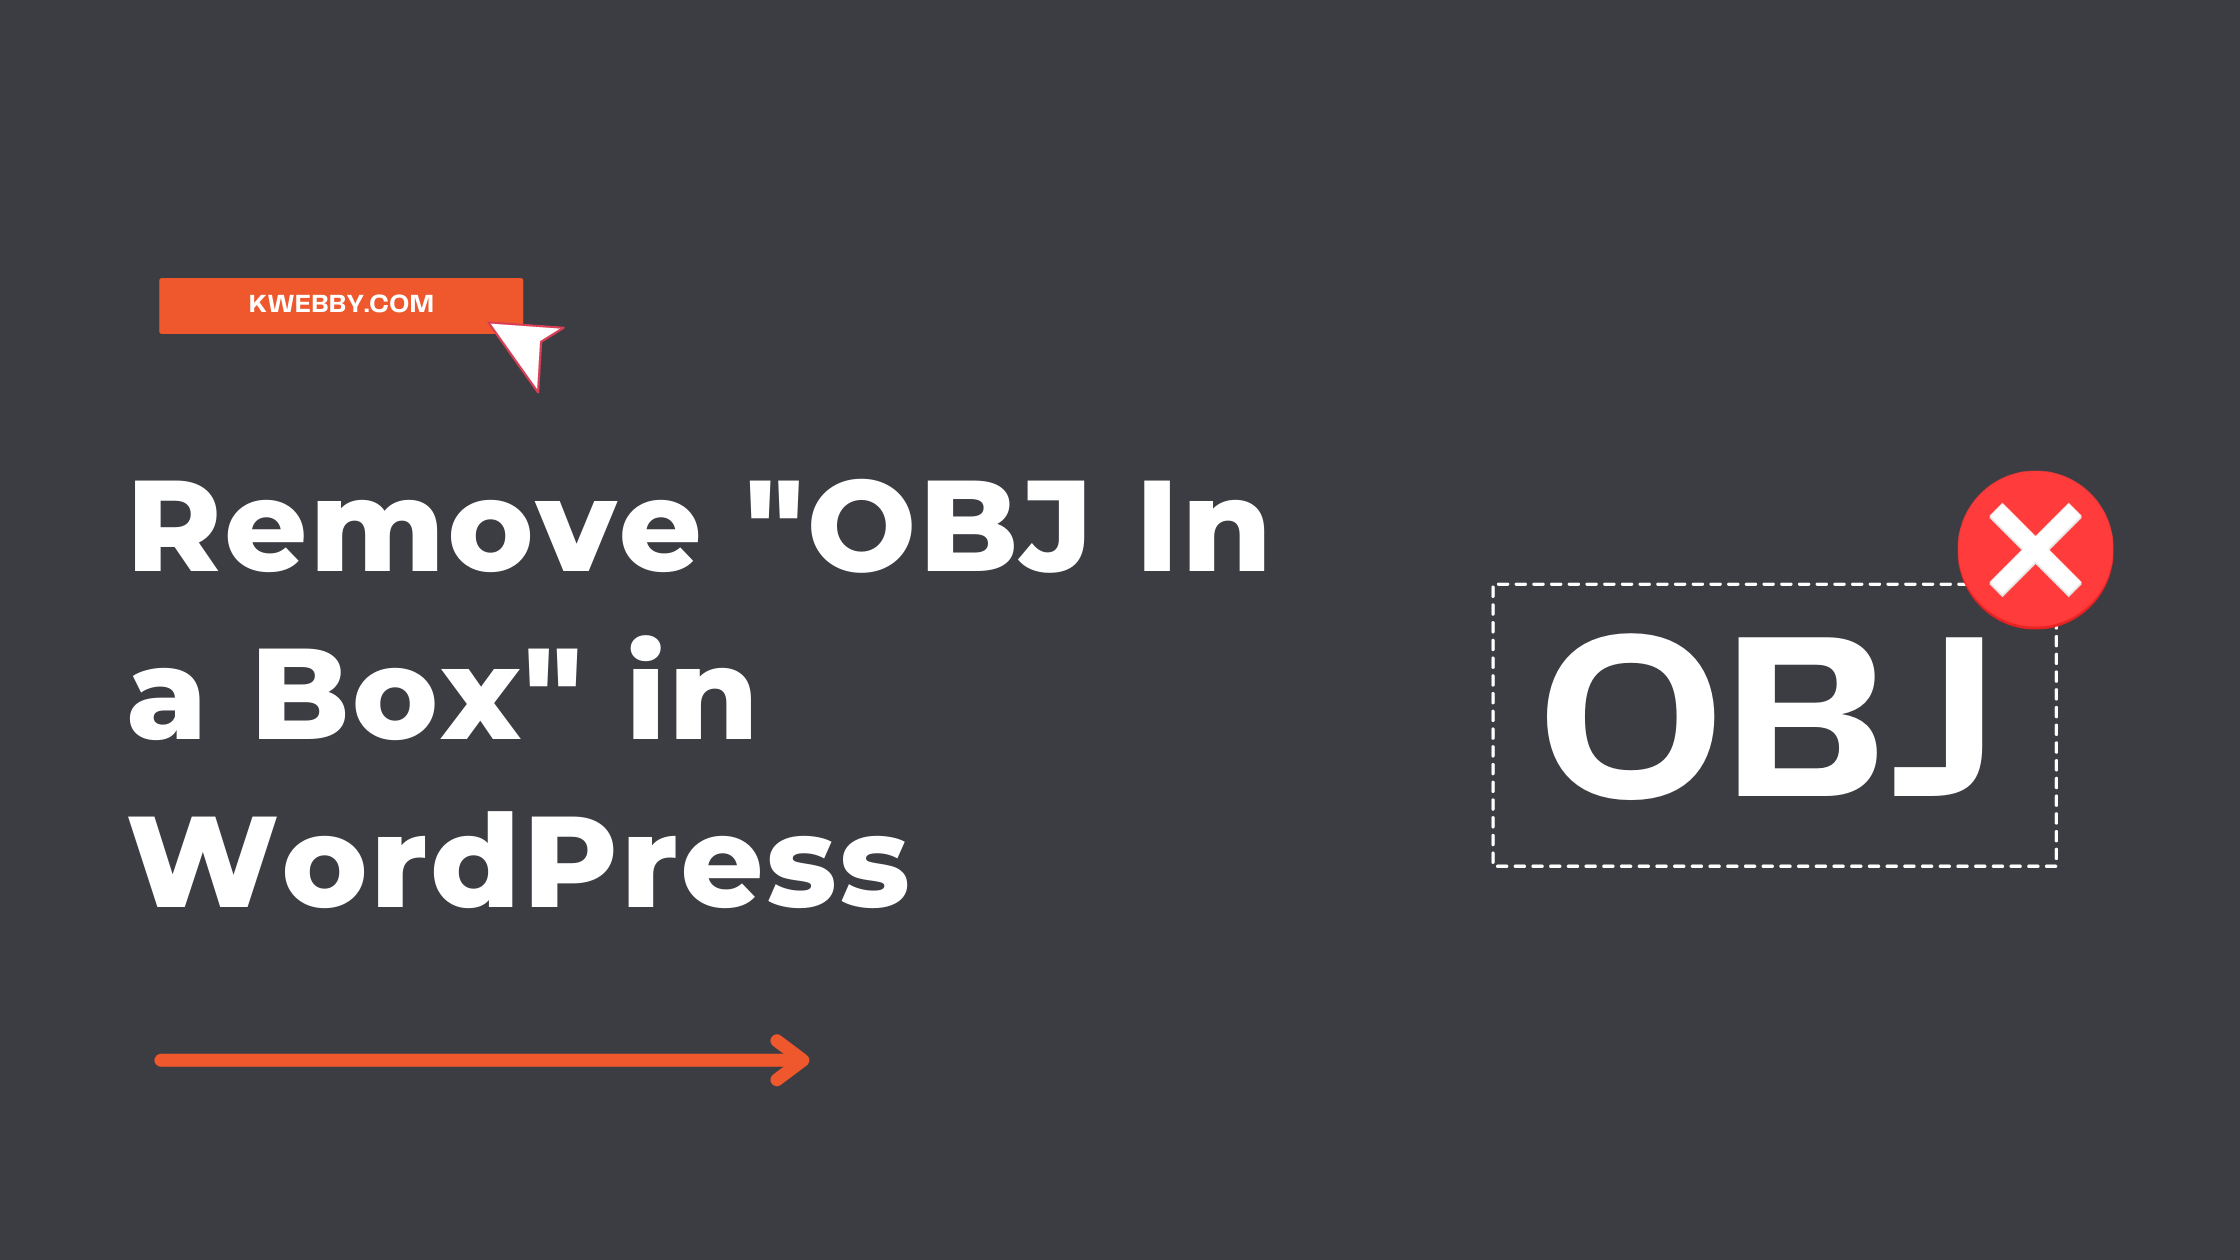 How to Remove “OBJ In a Box” in WordPress in 2 Easy Steps